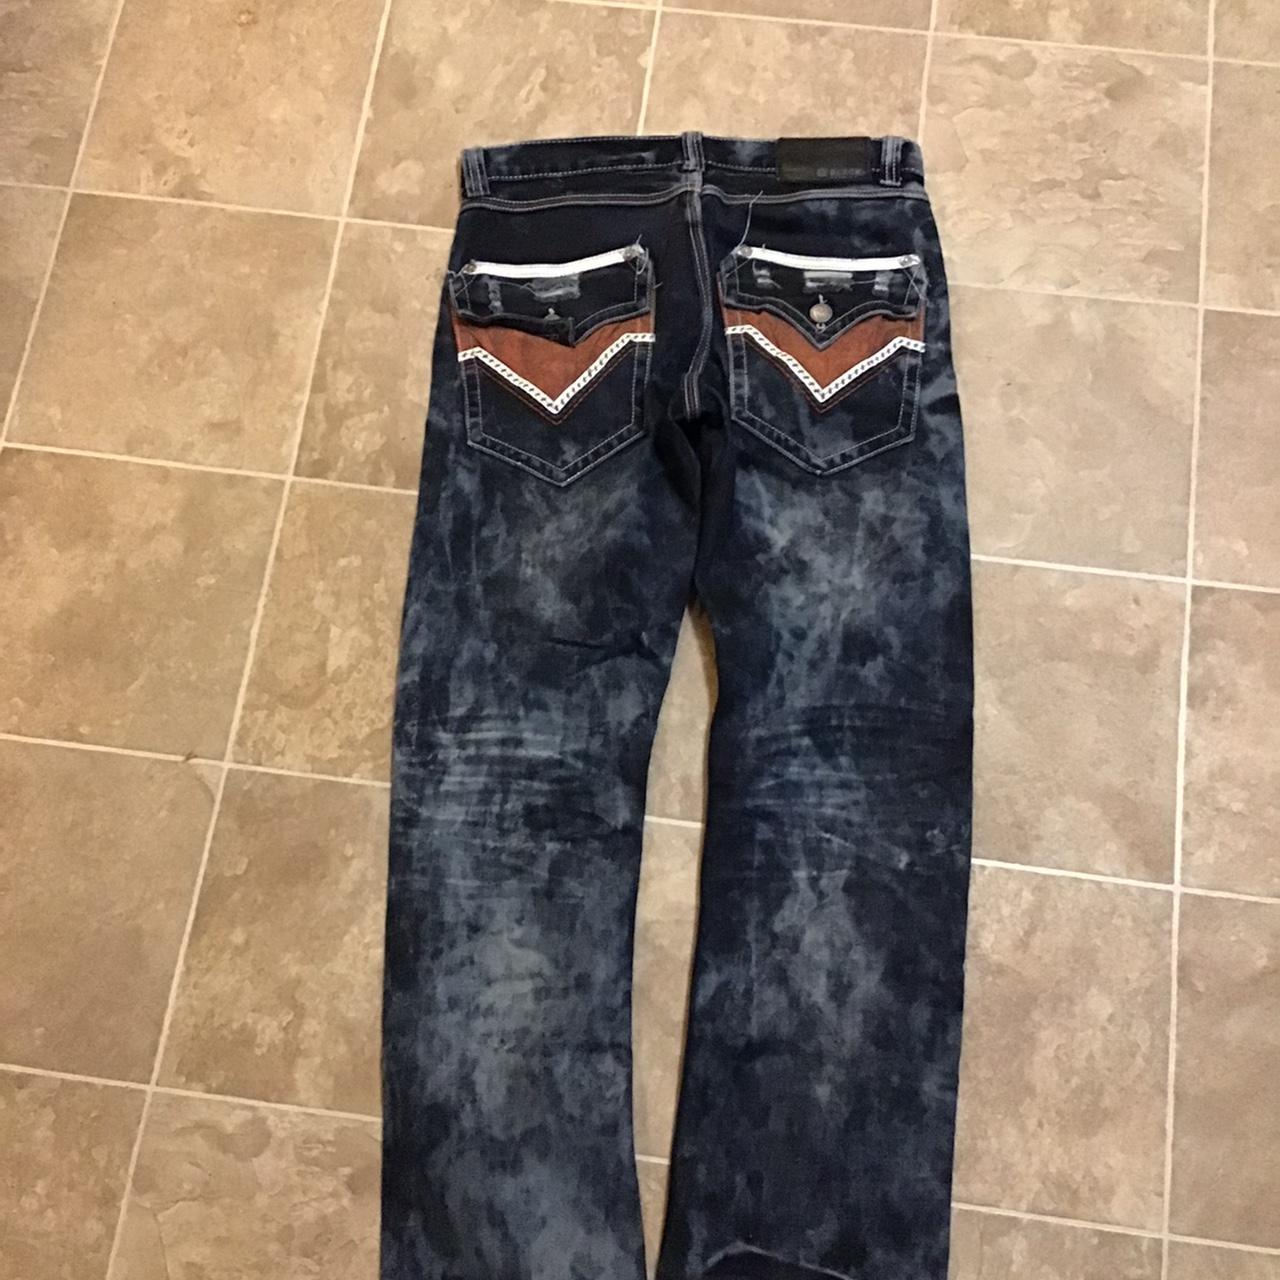 All Black Men's Black and Silver Jeans (3)